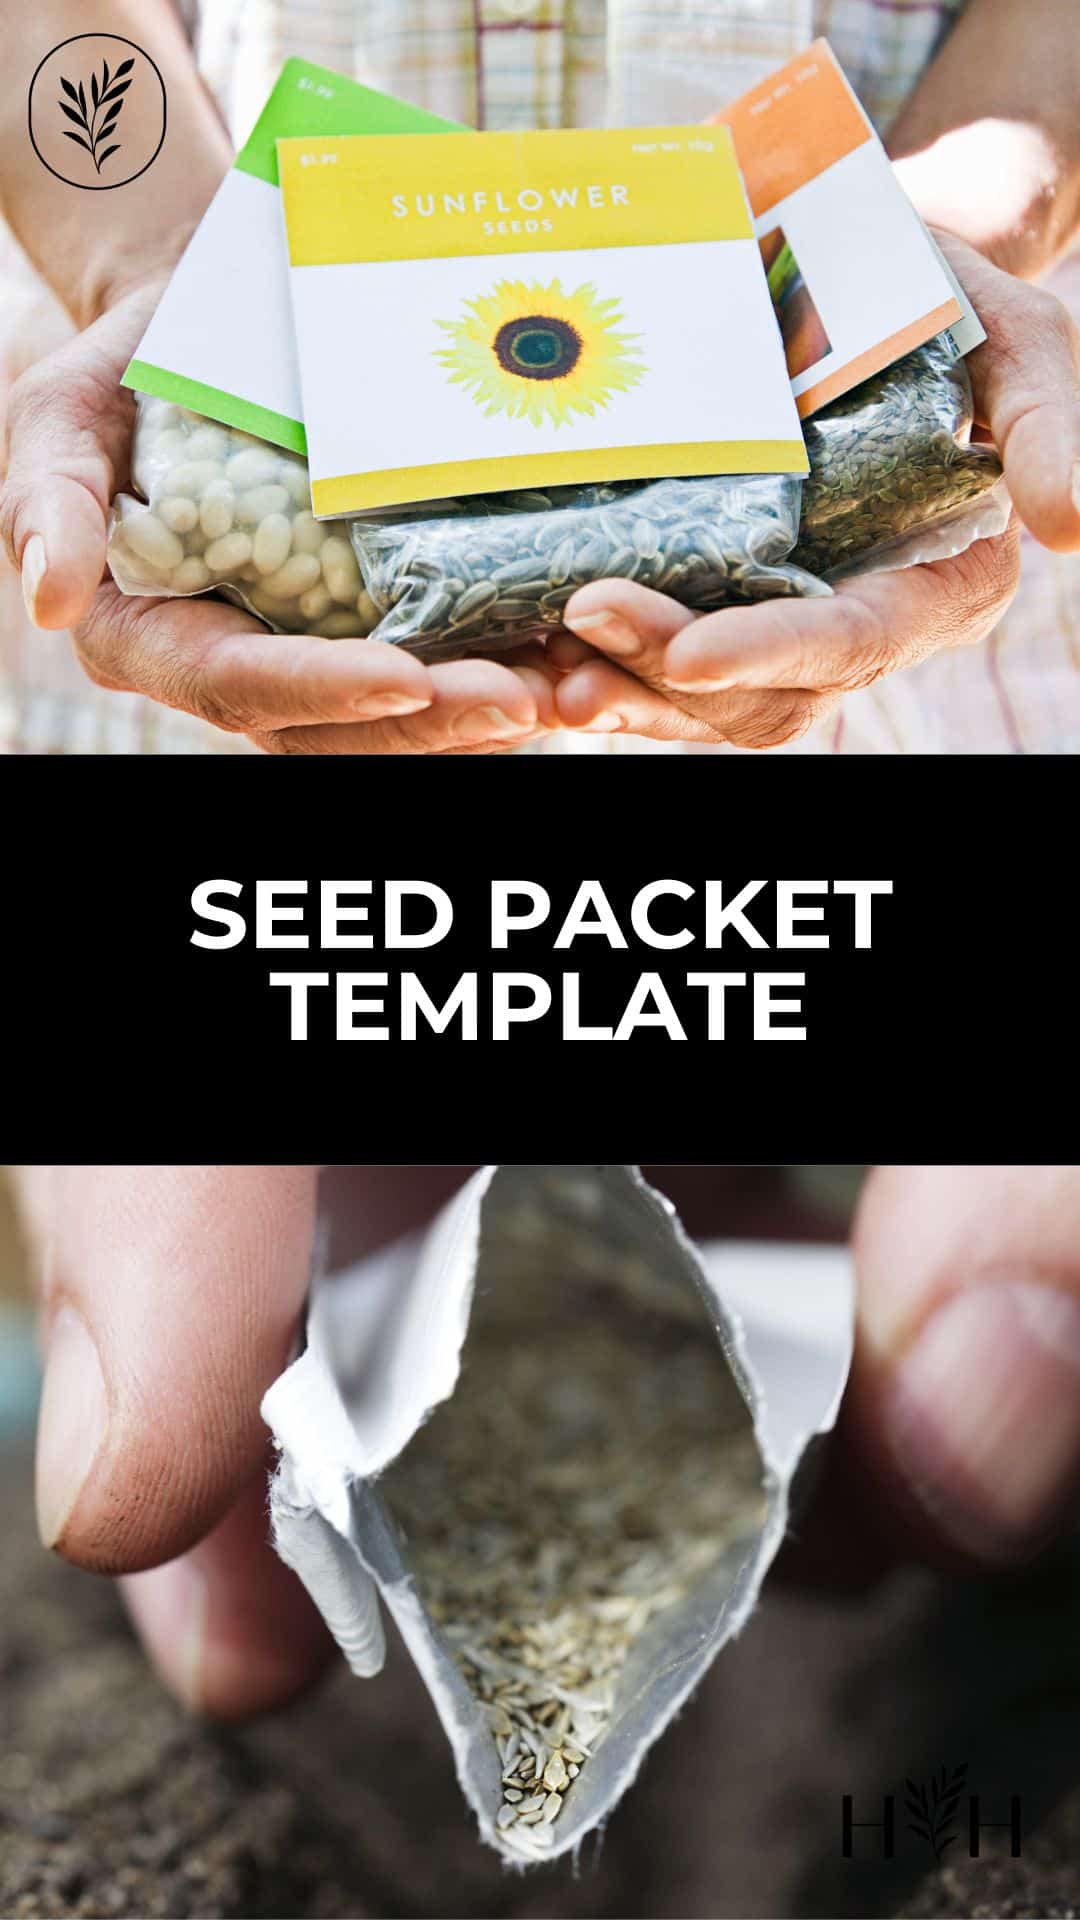 Seed packet template via @home4theharvest